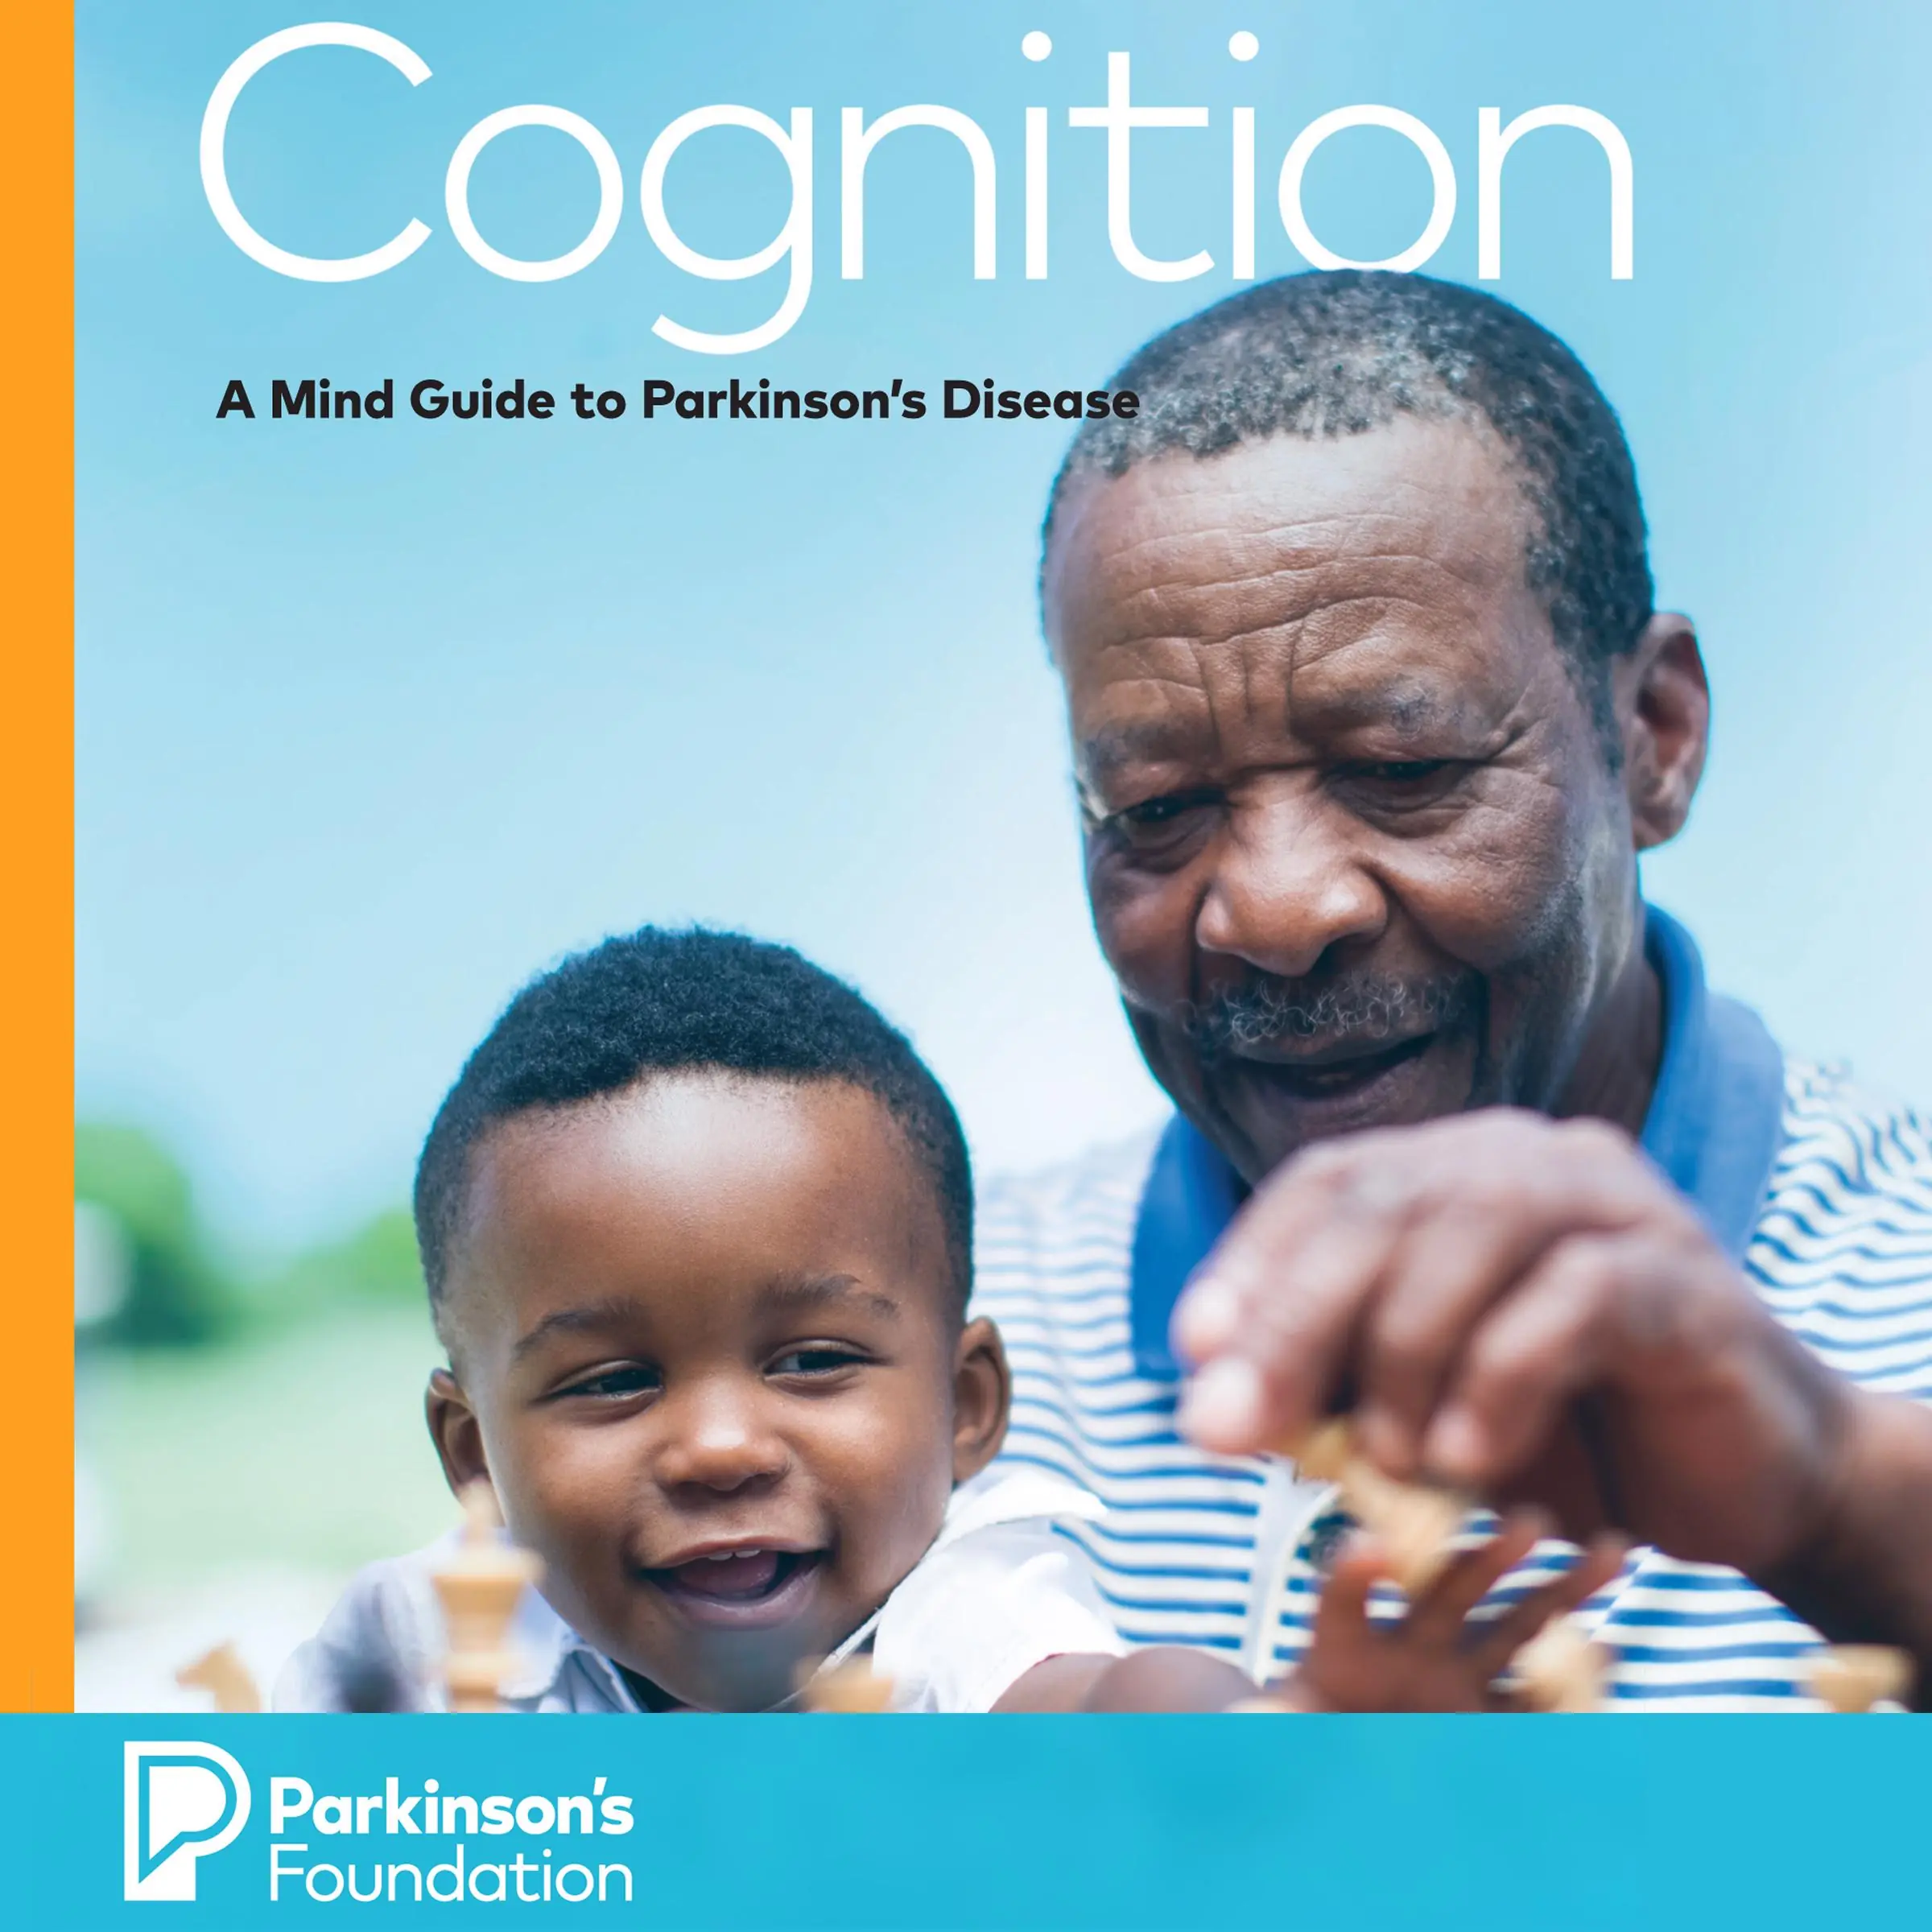 Cognition Audiobook by Parkinsons Foundation